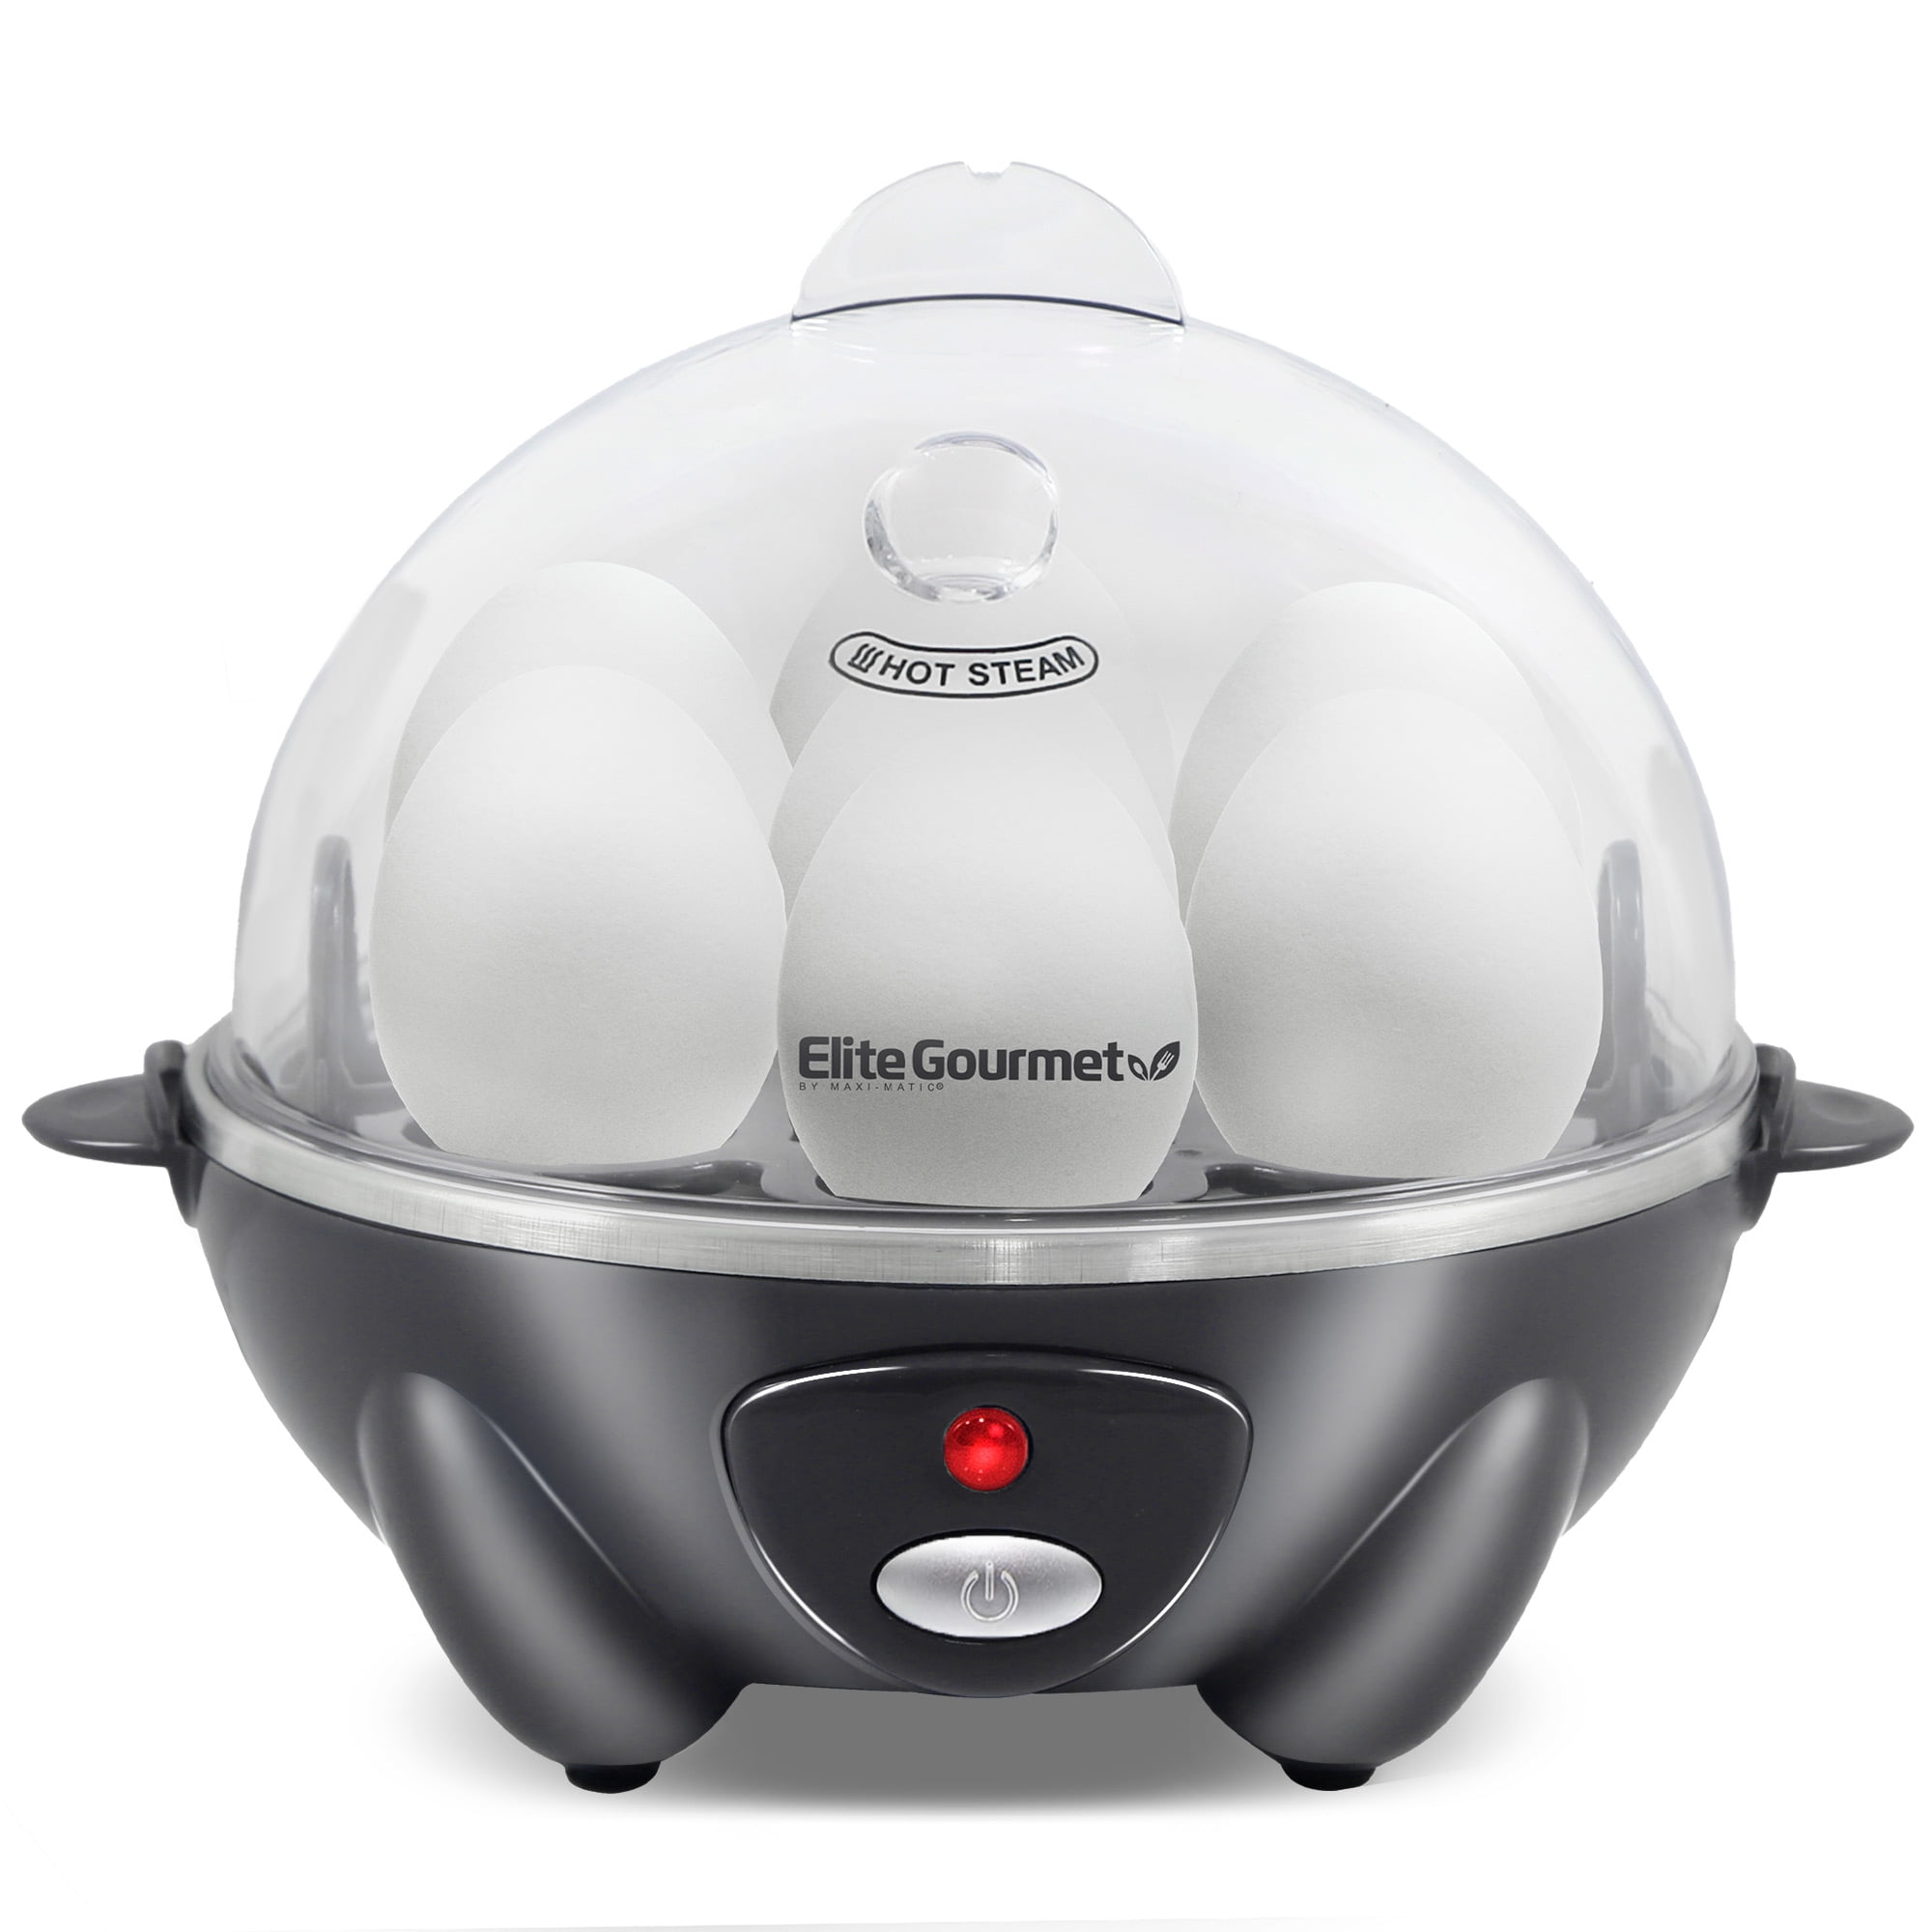 Elite Gourmet Rice Cooker/Food Steamer -NEW, 6 Cup, Sell